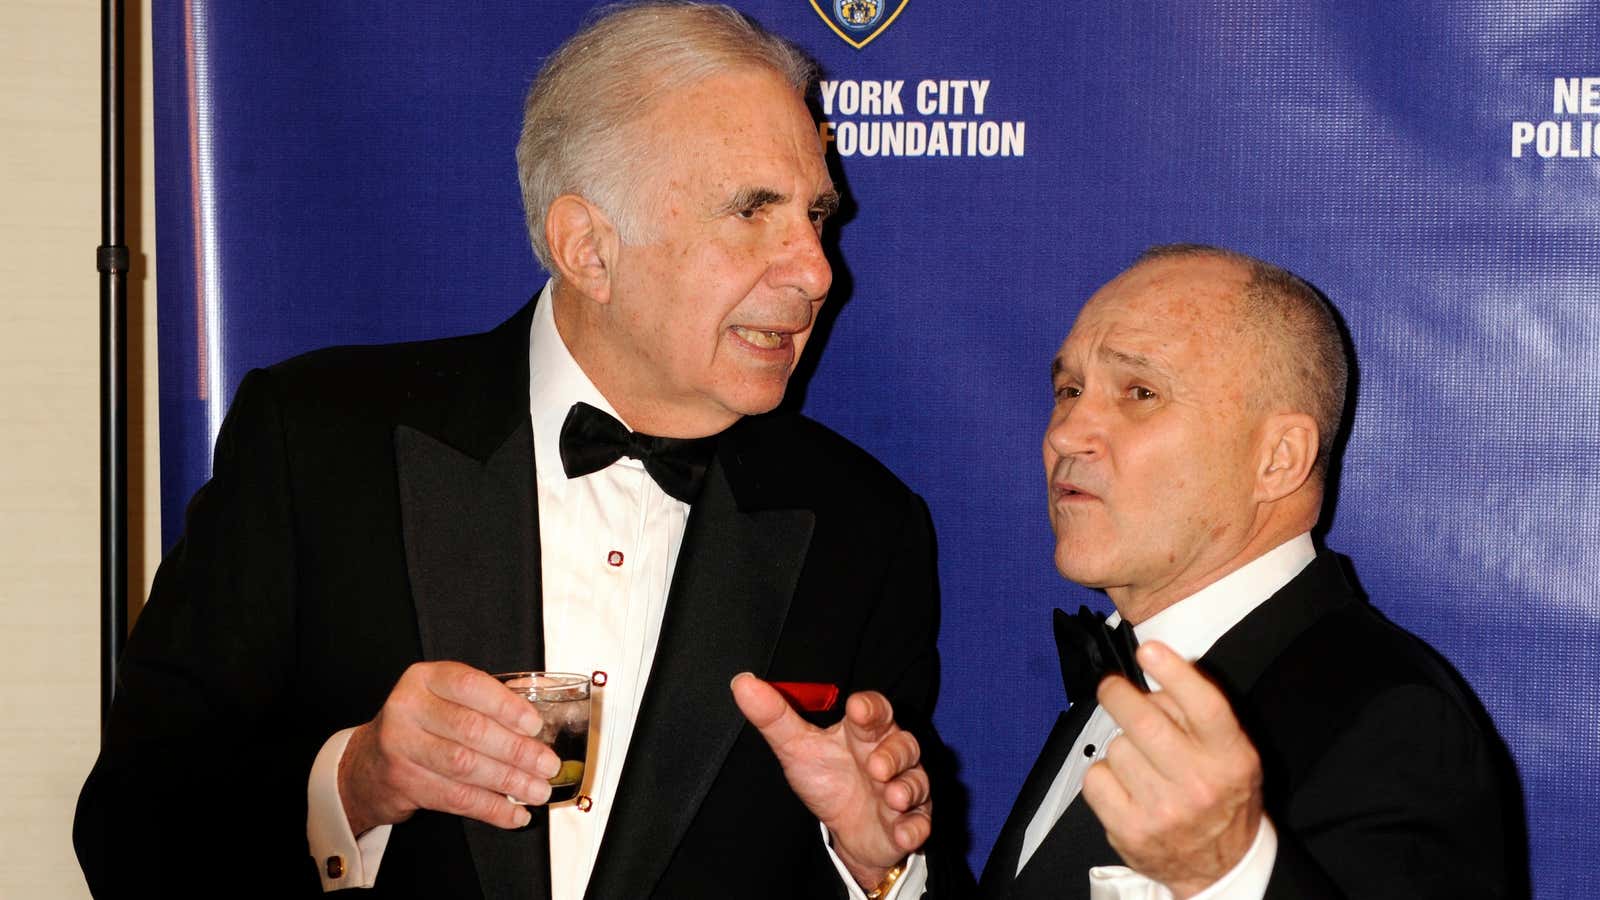 Don’t be fooled by the tux; Icahn’s a fighter.